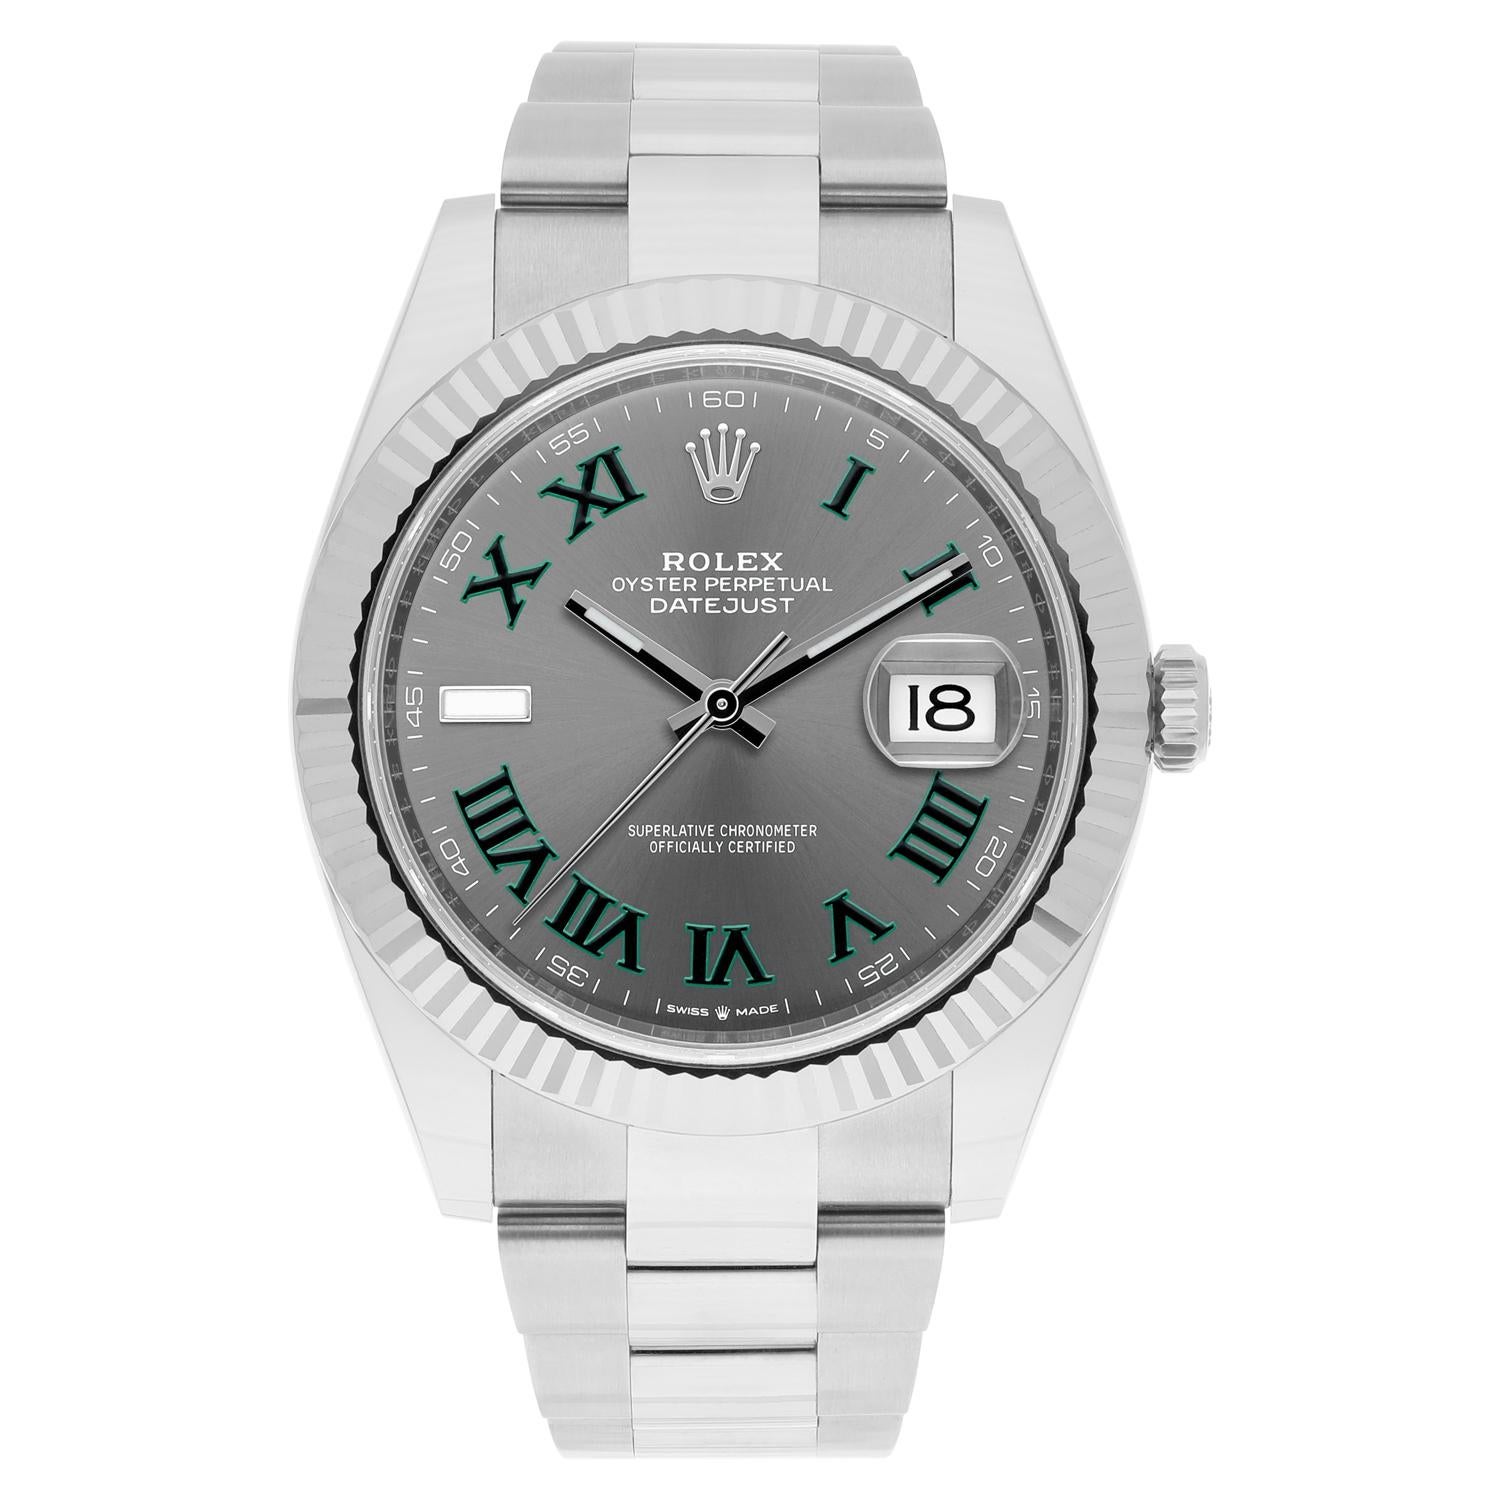 This magnificent Rolex Datejust wristwatch is a true masterpiece of Swiss craftsmanship. With its exquisite Wimbledon Dial and elegant Roman numerals, it is the epitome of luxury and style. The 41mm stainless steel case and fluted bezel in silver